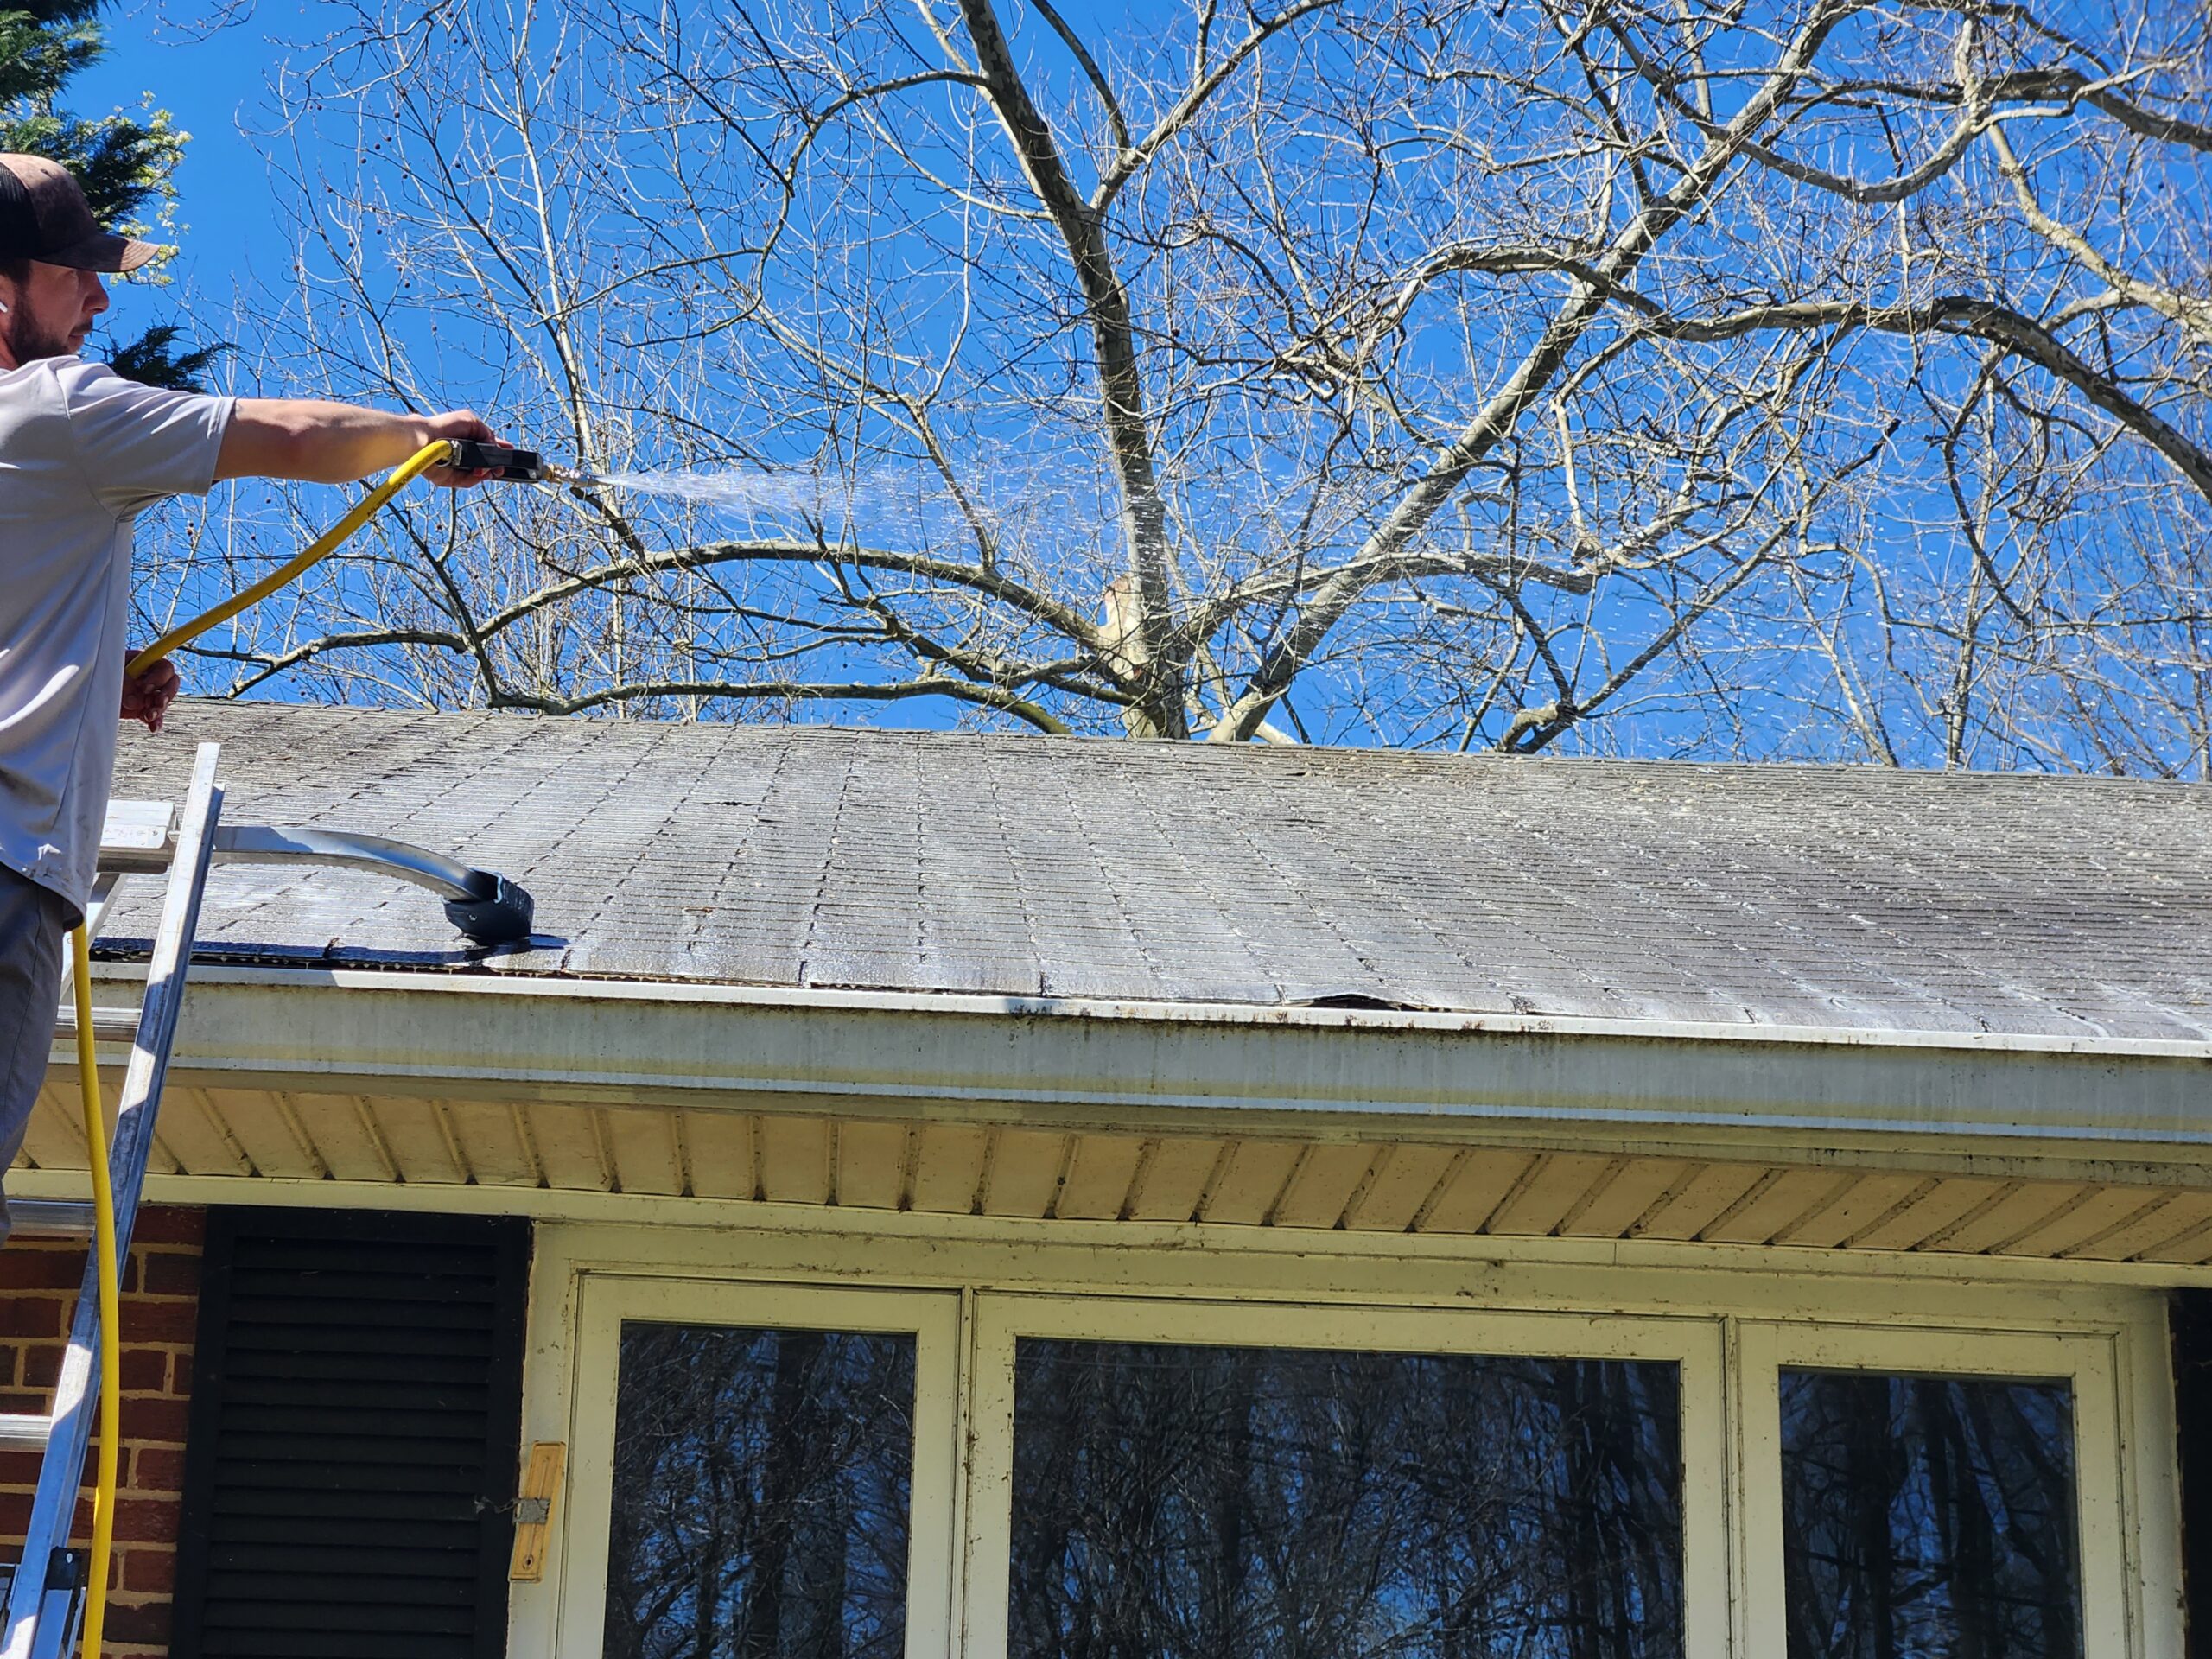 roof cleaning treatment